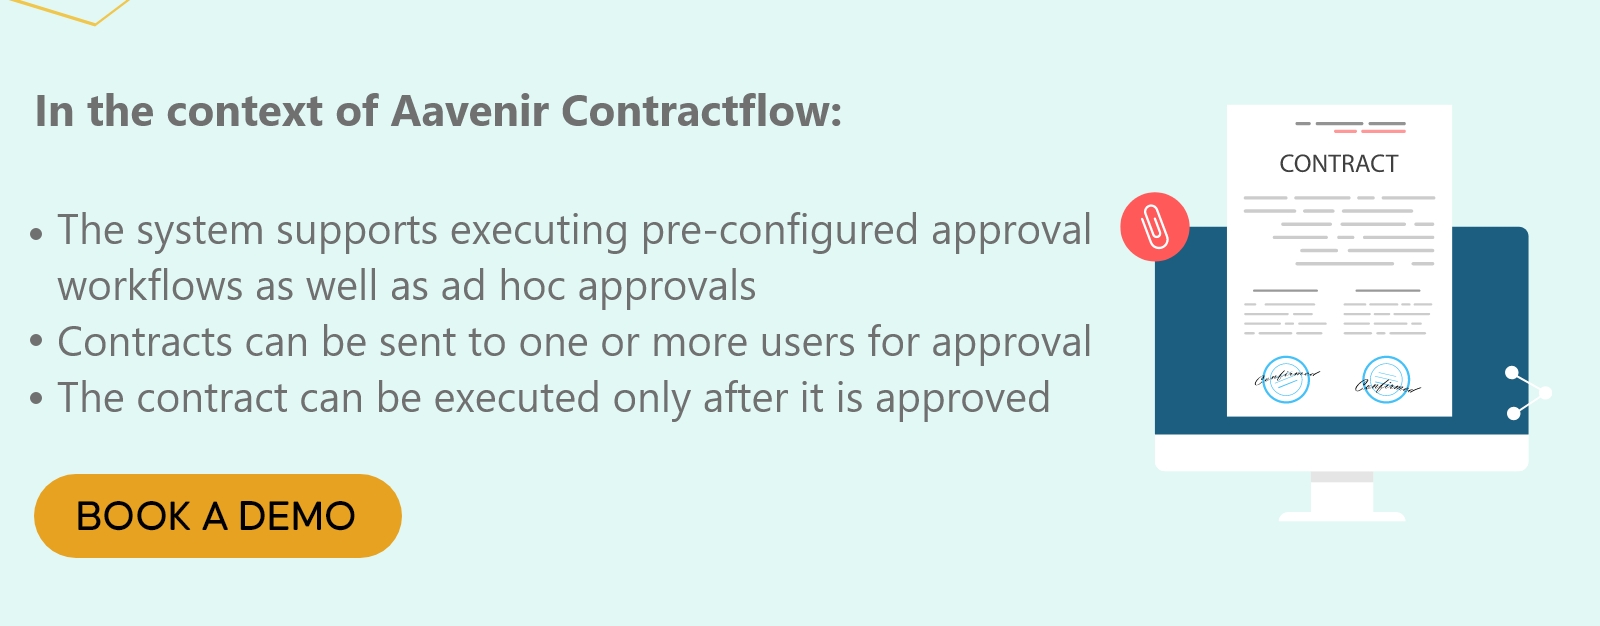 Aavenir Contractflow Contract Approval